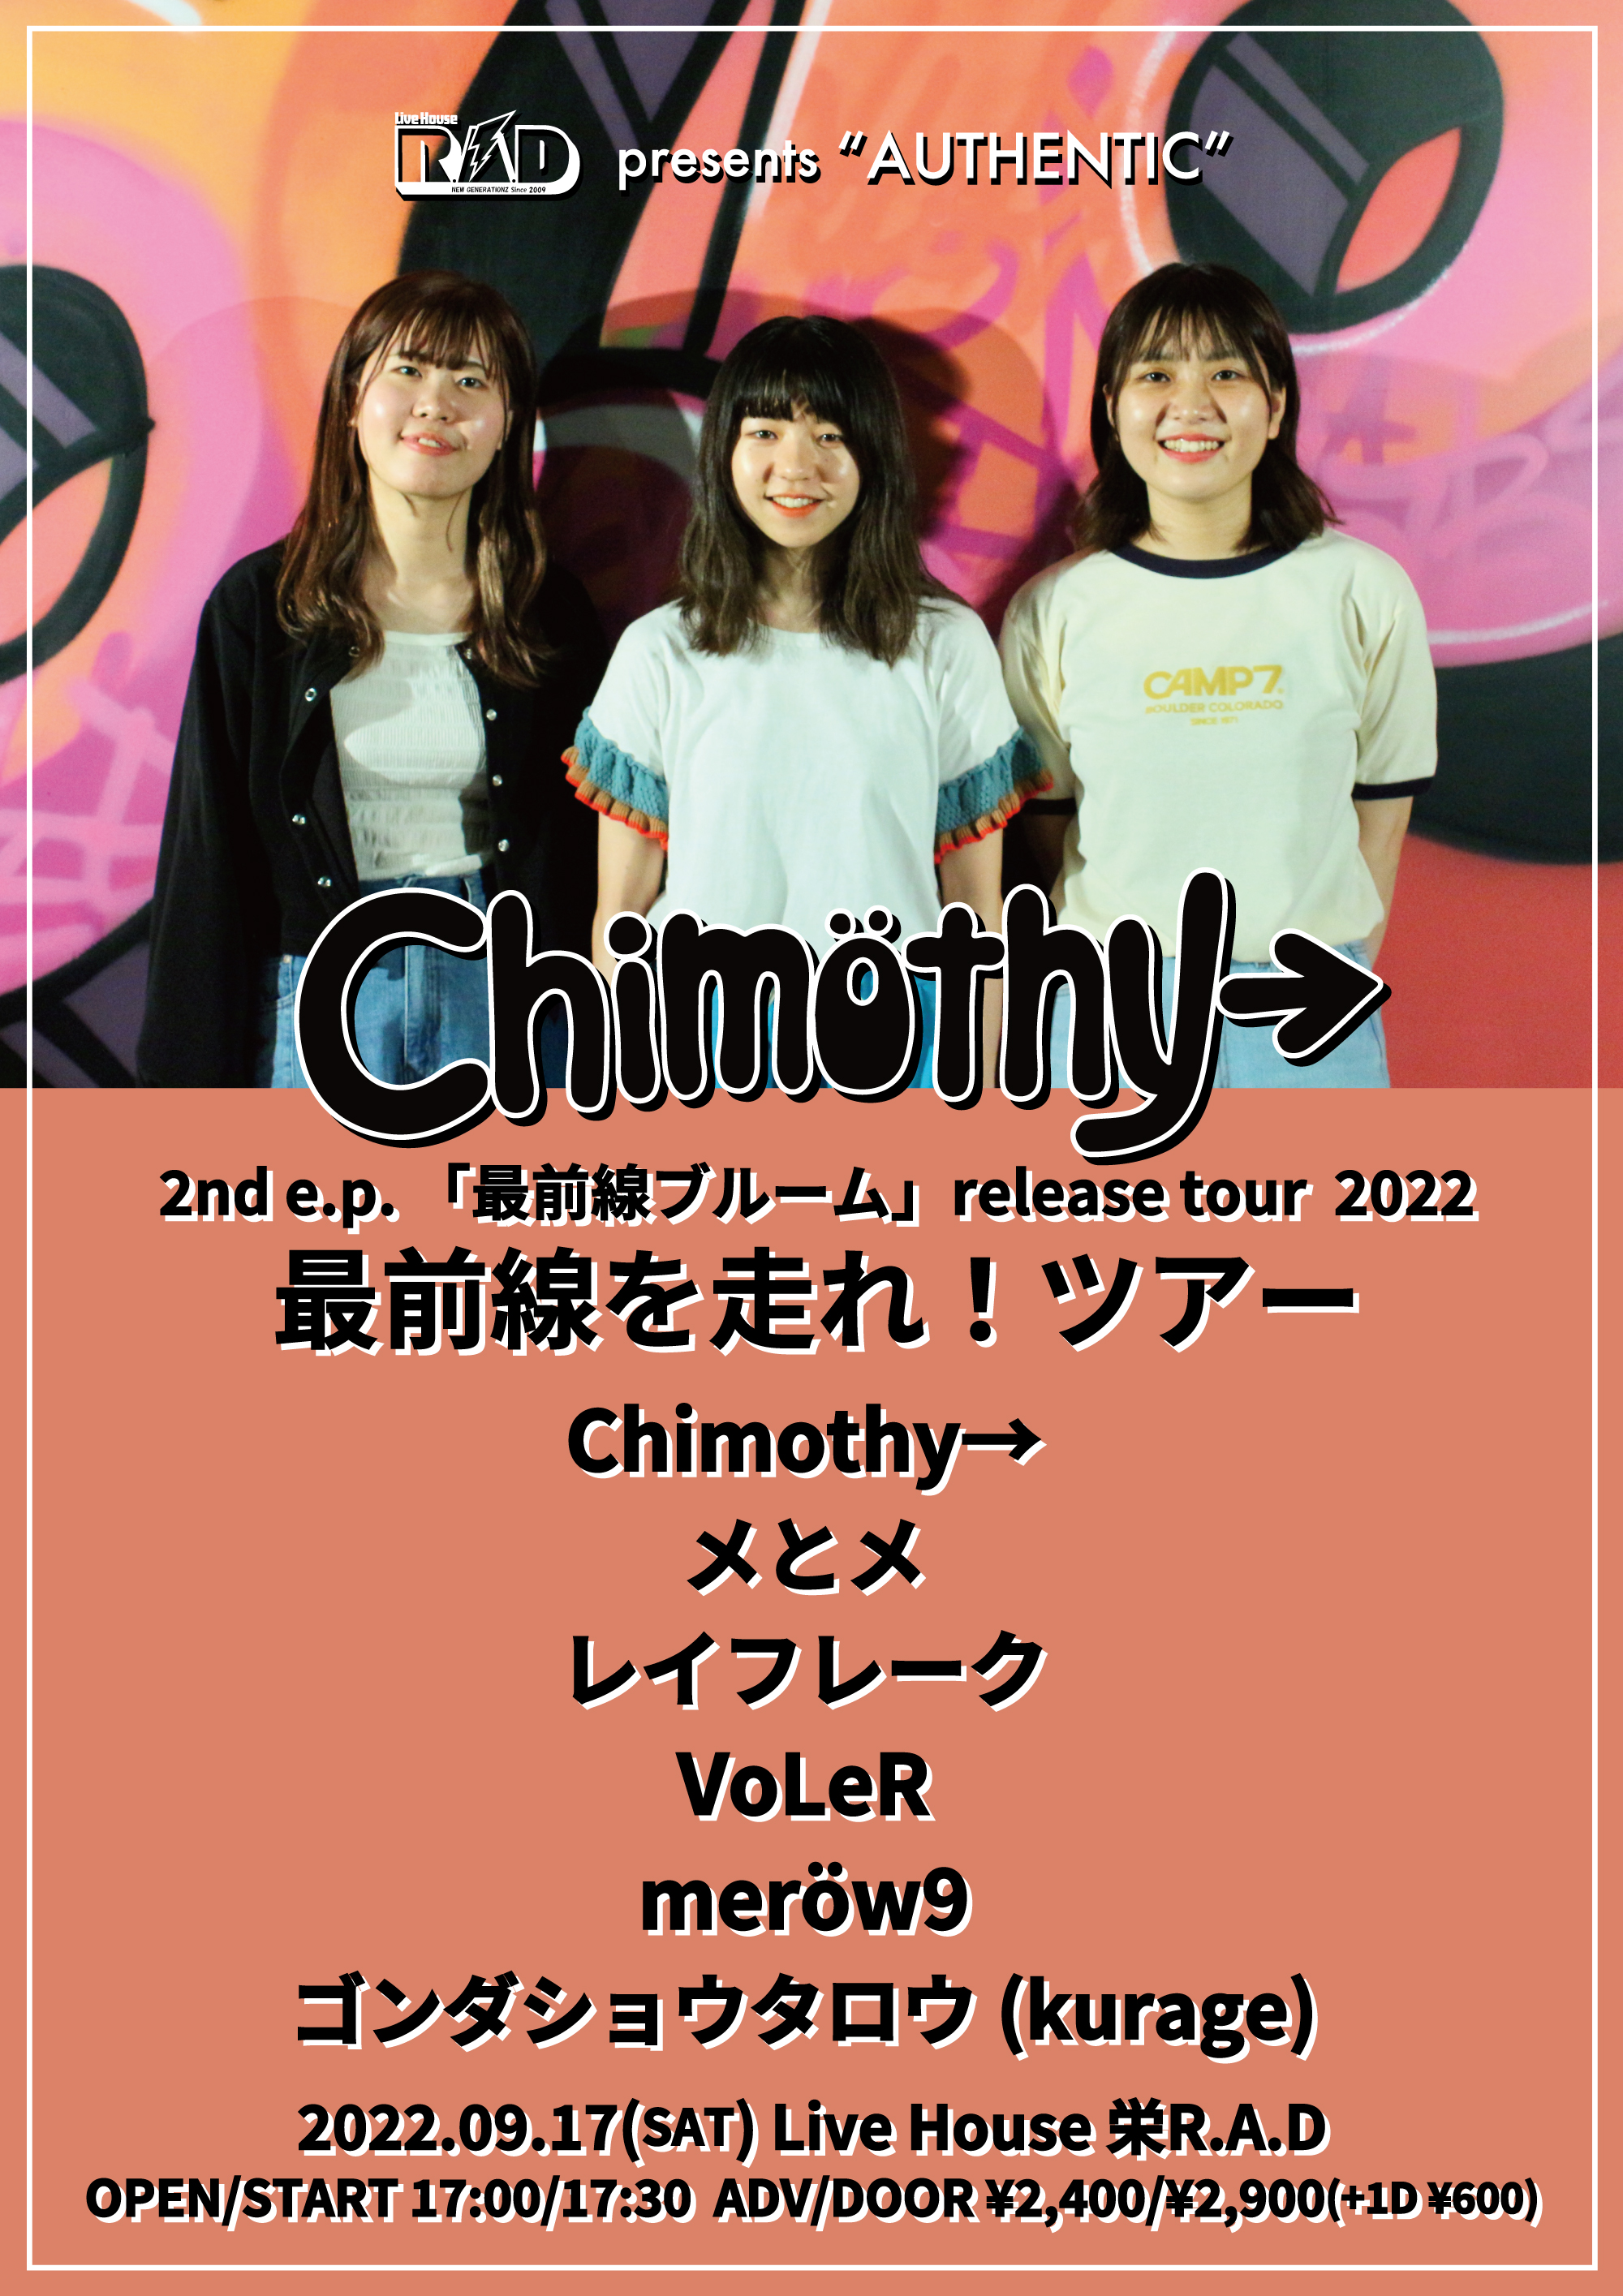 R.A.D presents “AUTHENTIC” Chimothy→「最前線を走れツアー」